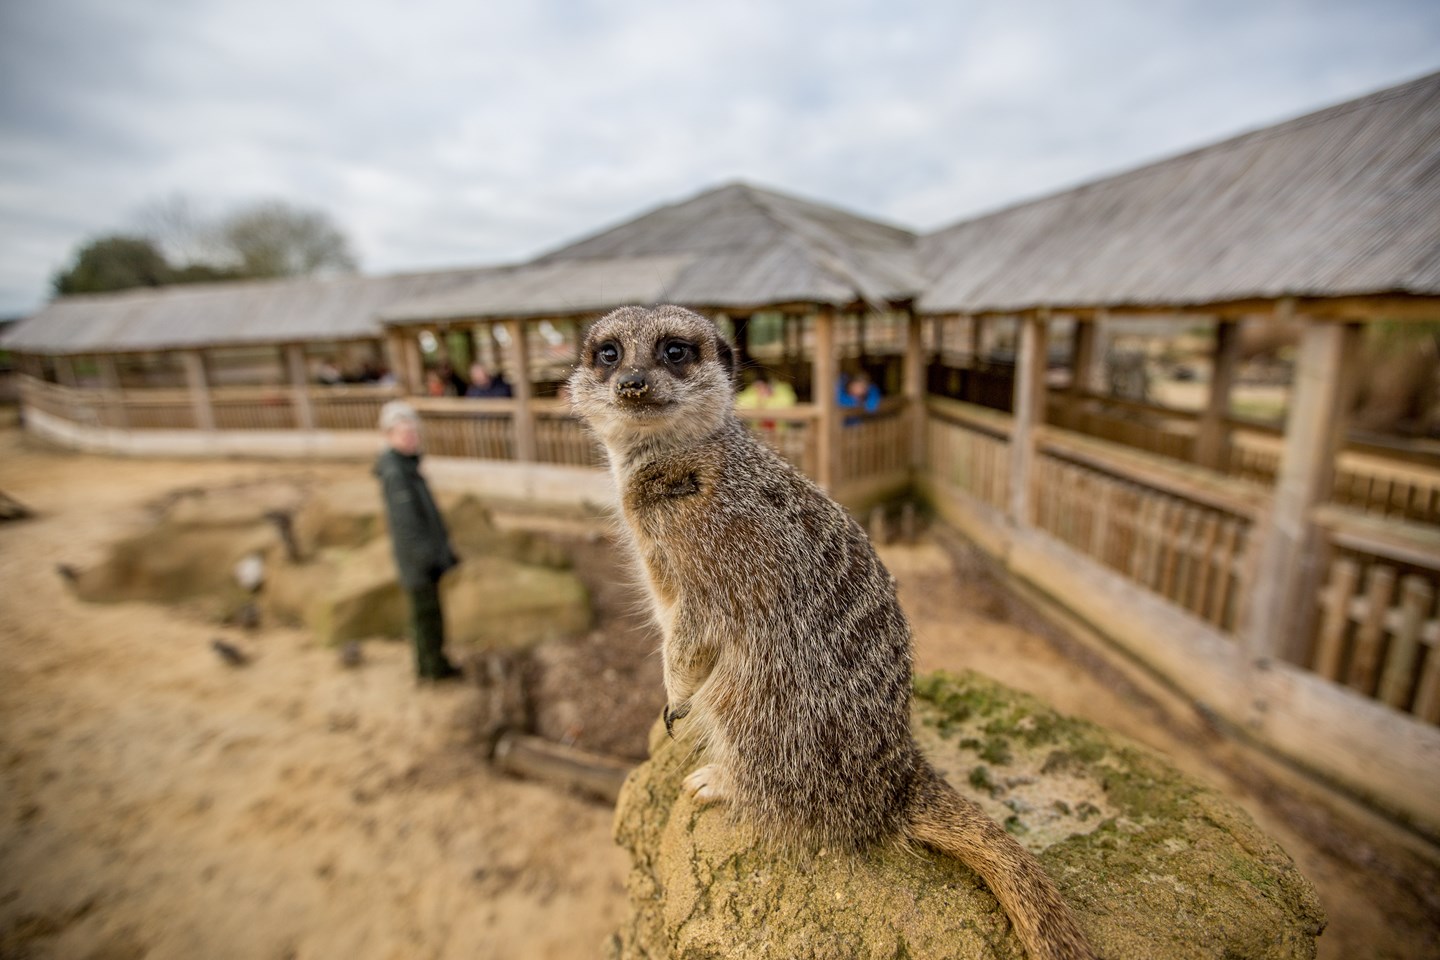 Meerkat stares at camera from enclosure in Desert Springs while visitors watch from viewing platform